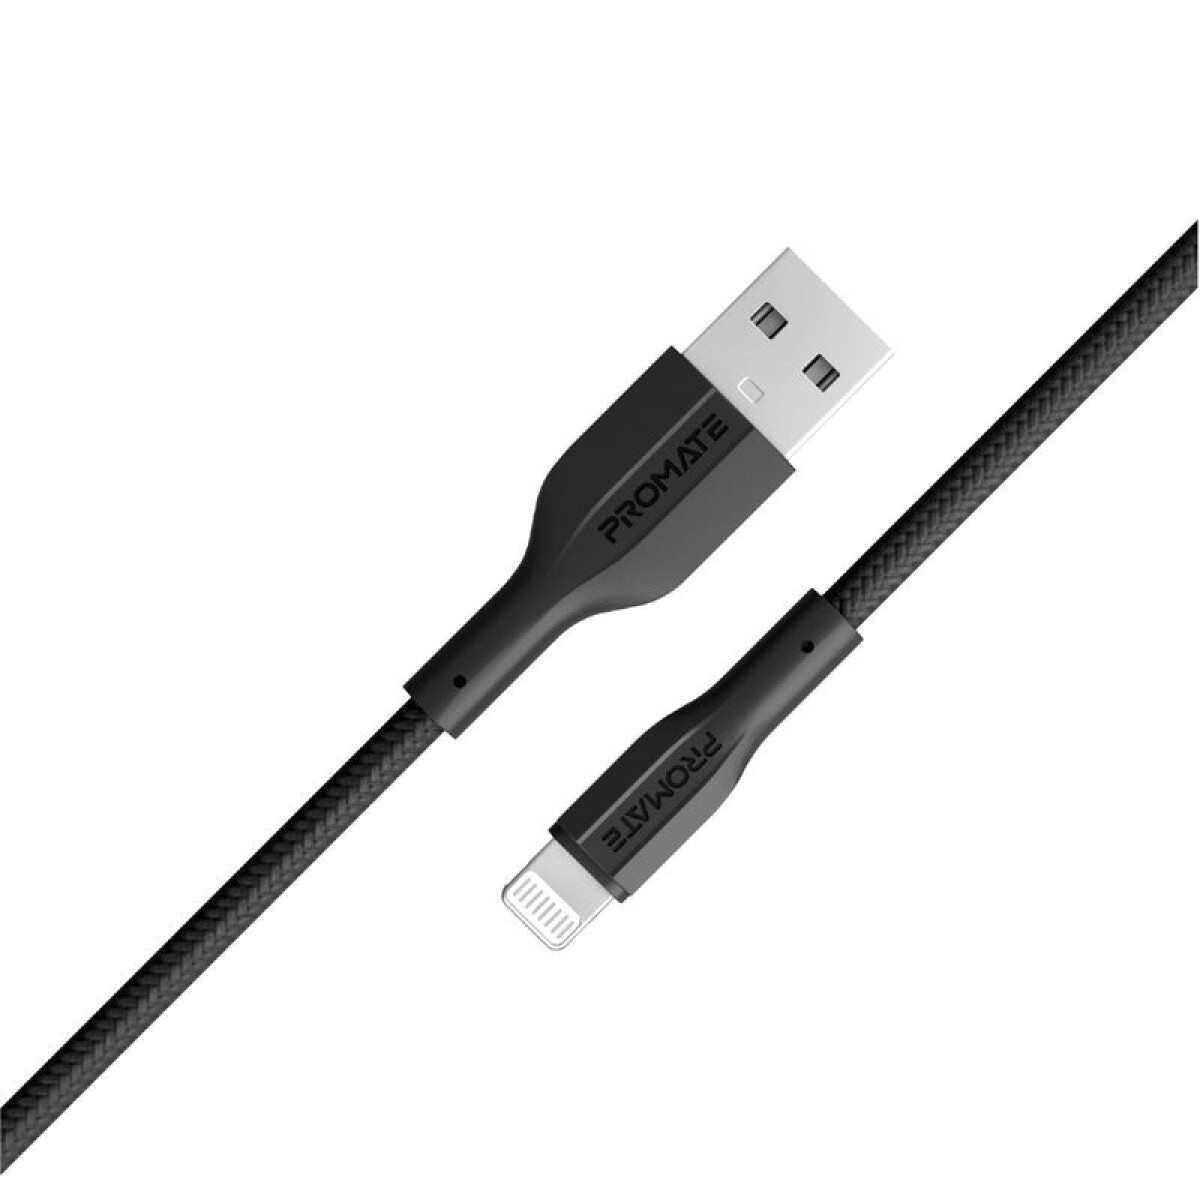 Cable USB-A a Lightning 1M PROMATE negro - Cable Usb-a A Lightning 1m Promate Negro 